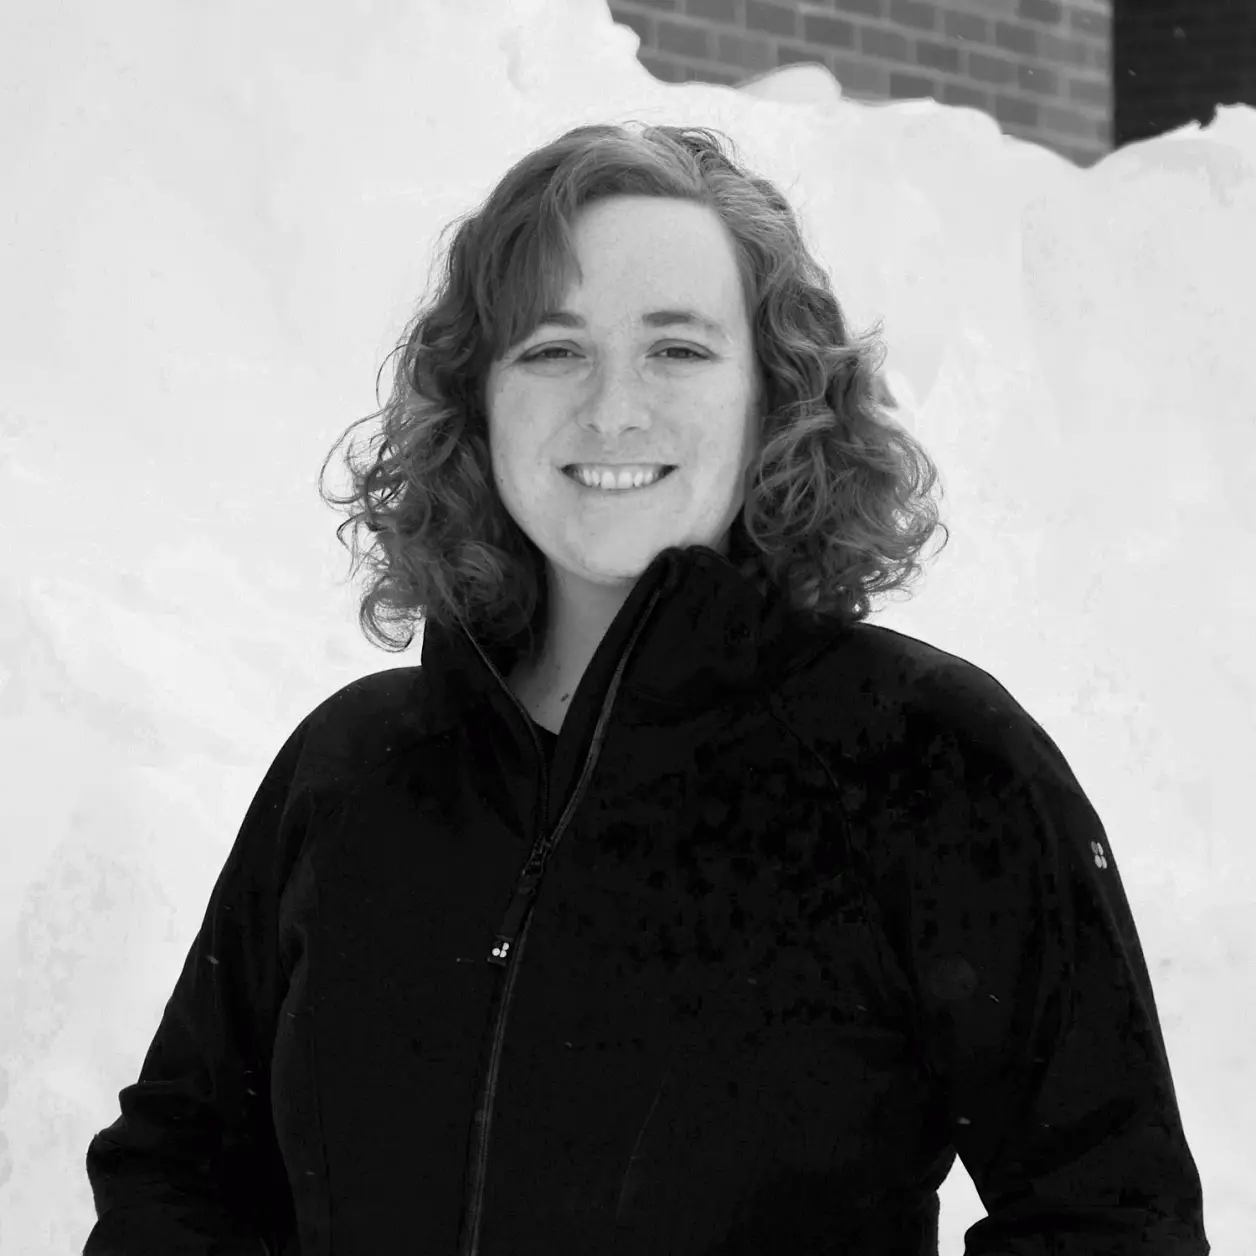 A black and white photo of a woman standing in the snow in a black jacket smiling at the camera.